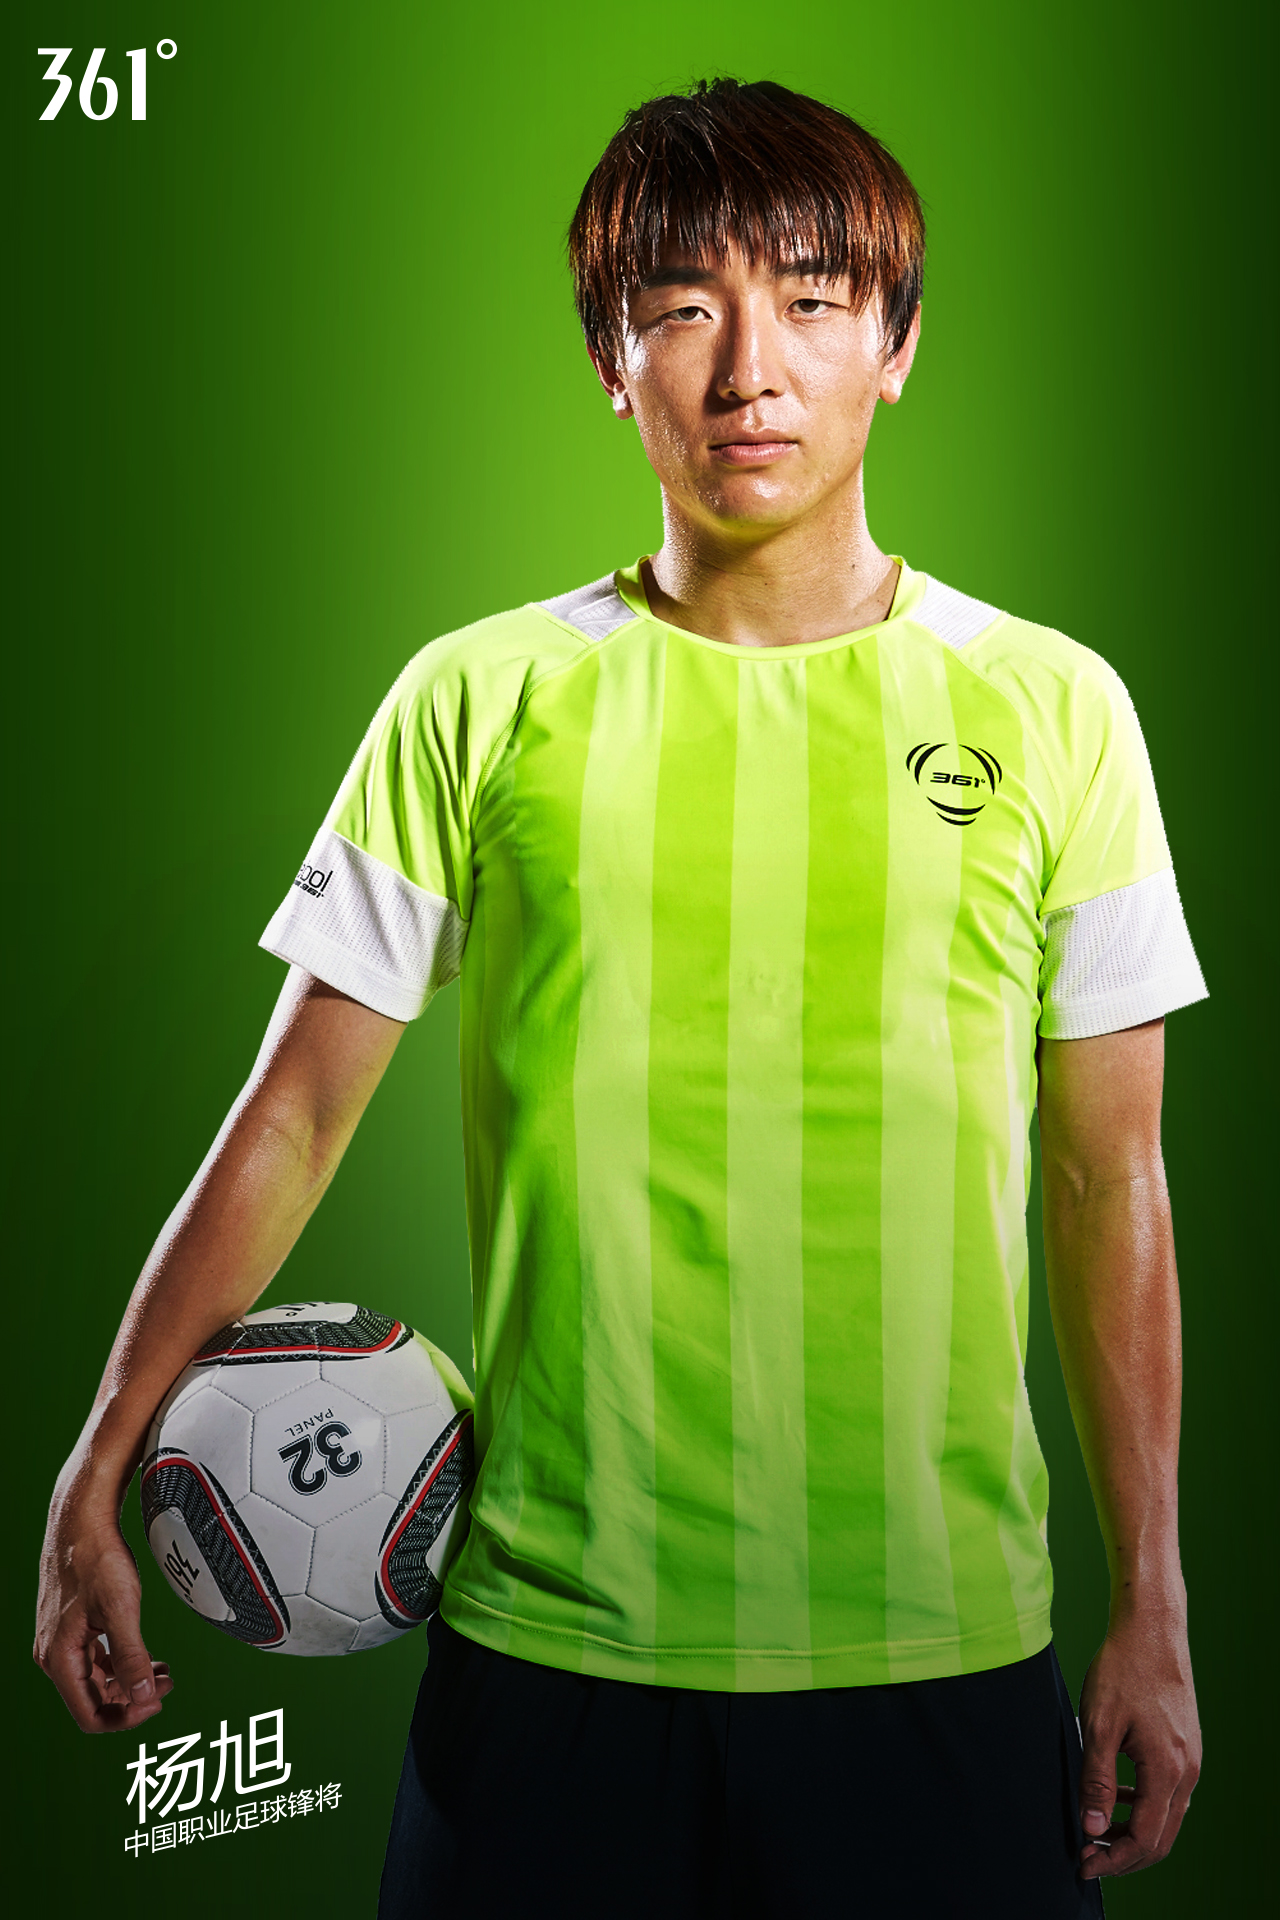 361 Degrees has signed Yang Xu, China’s current national soccer striker